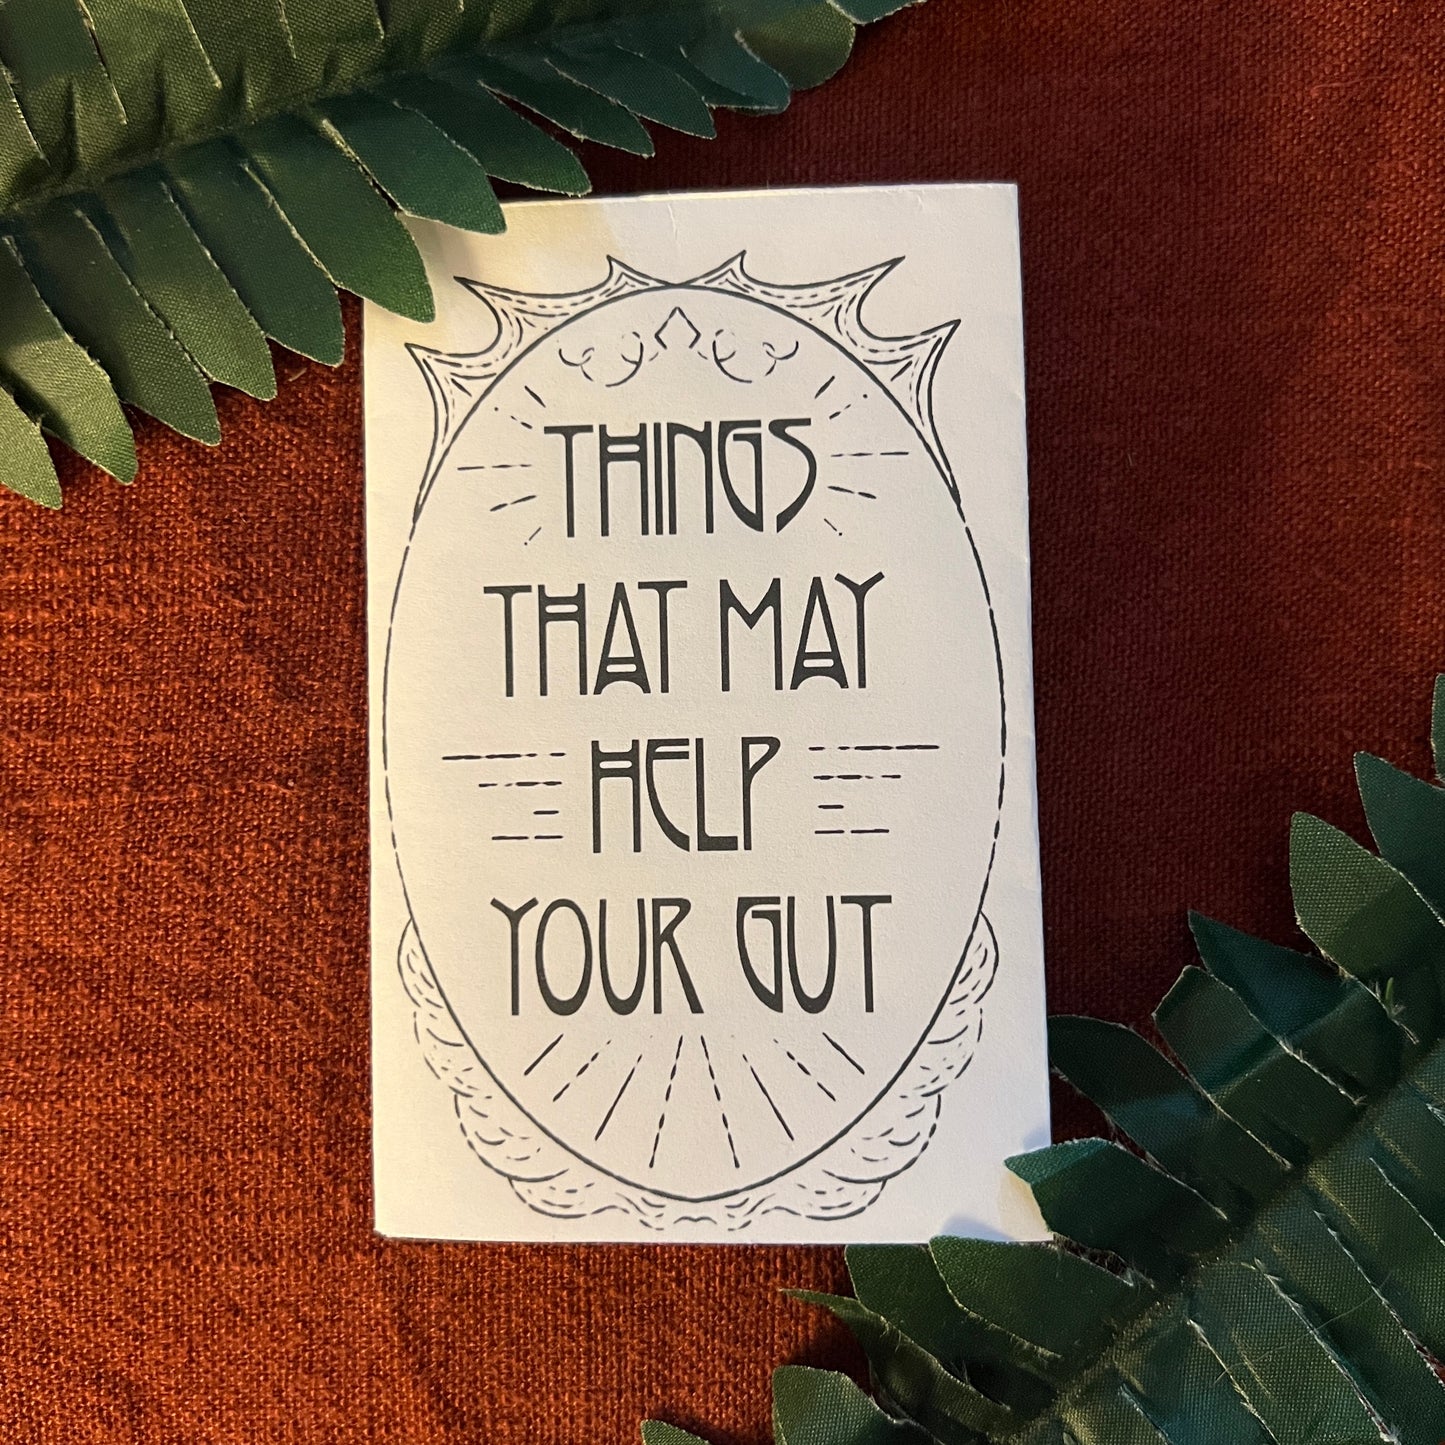 "Things That May Help Your Gut" Zine